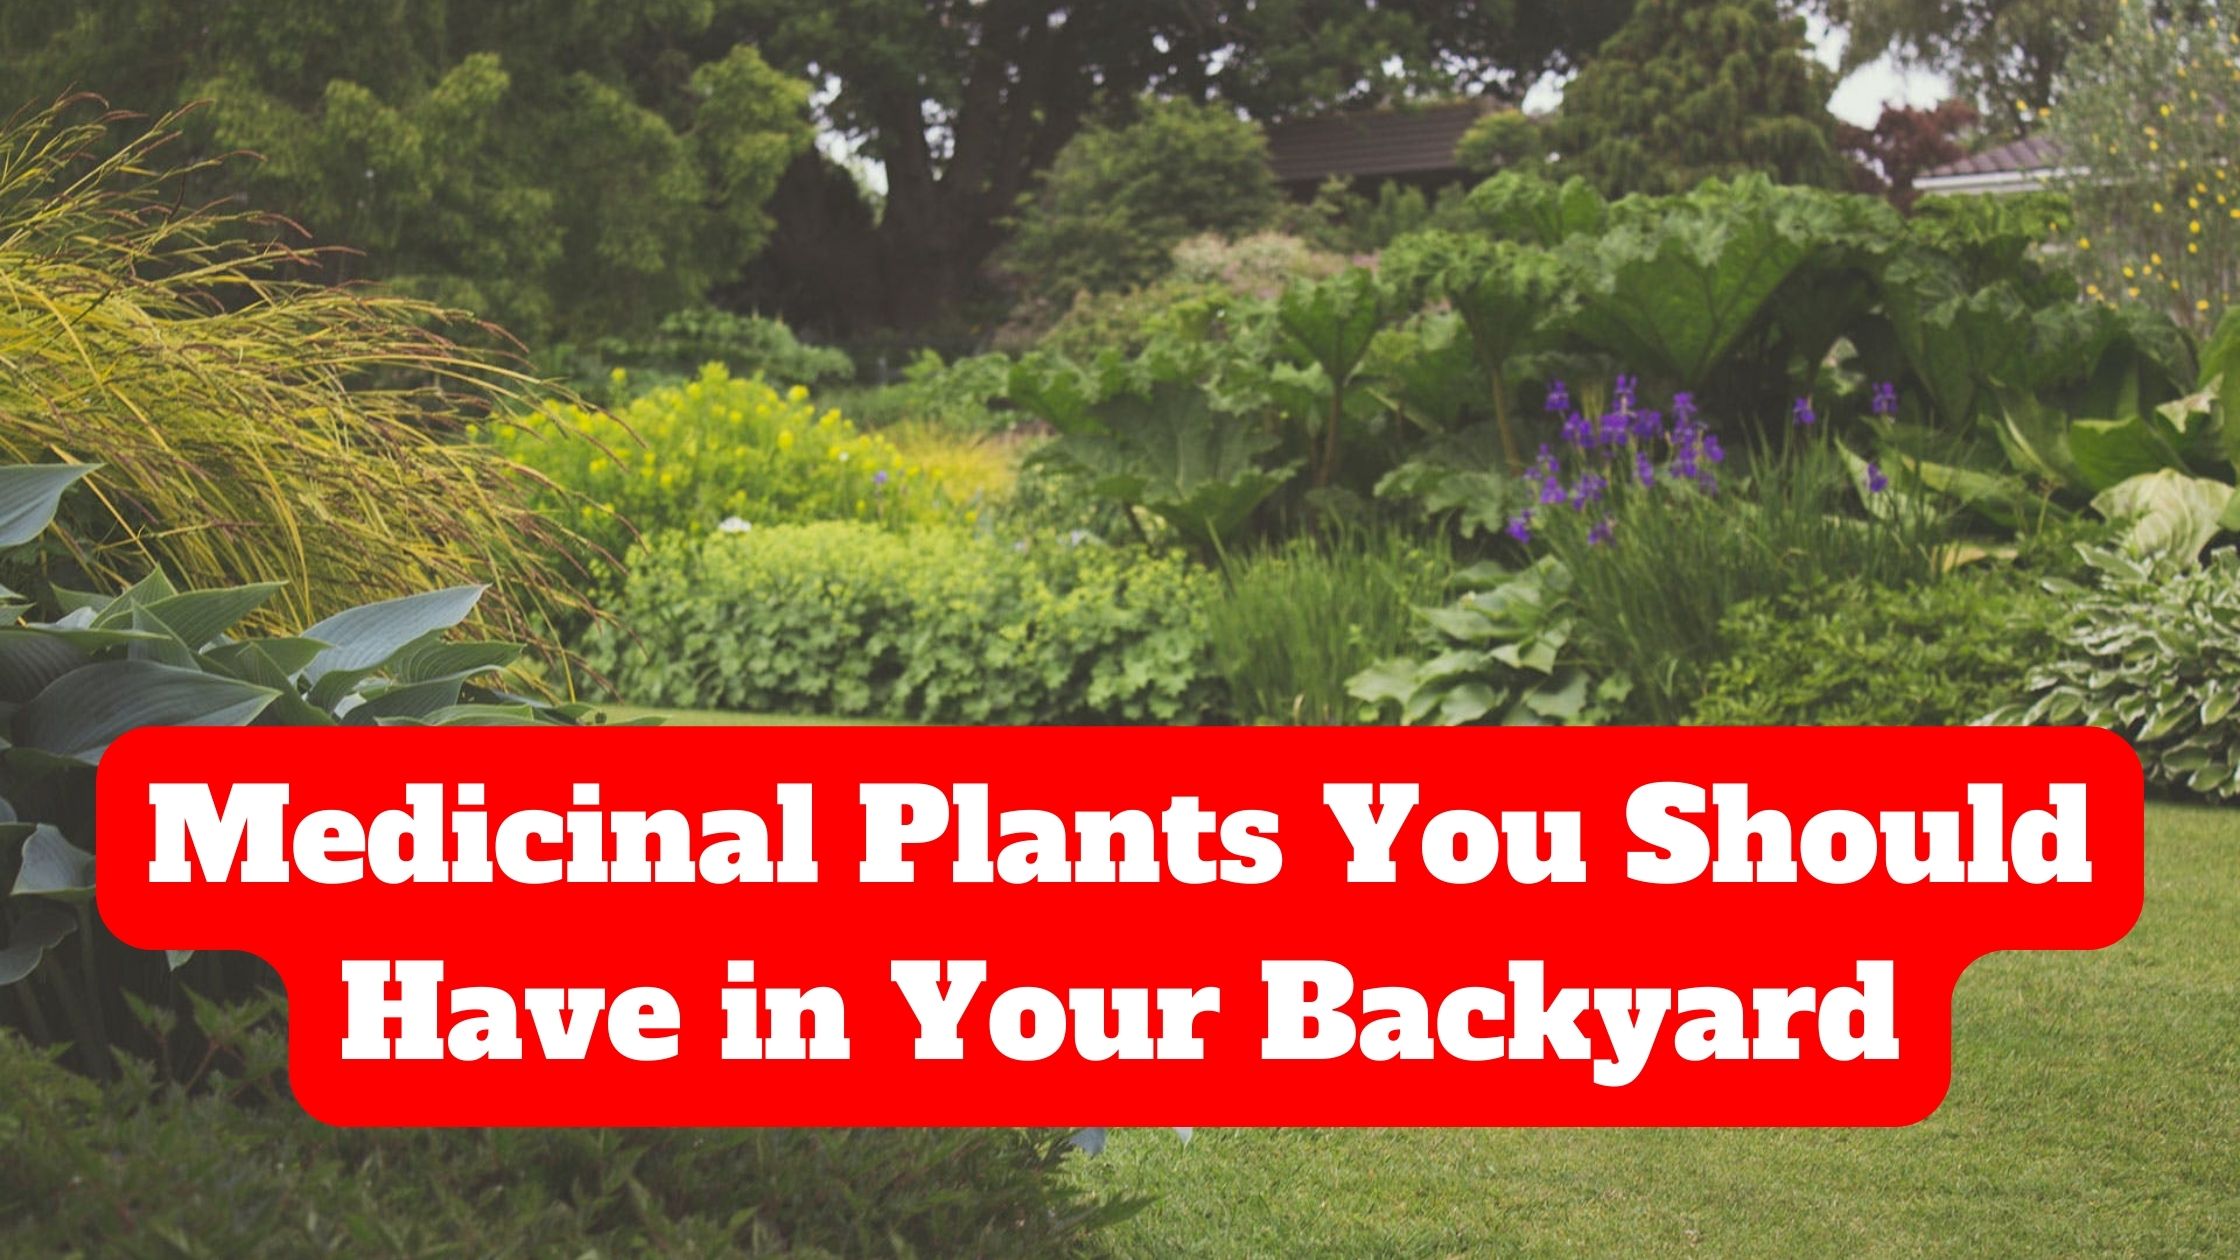 Medicinal Plants You Should Have in Your Backyard